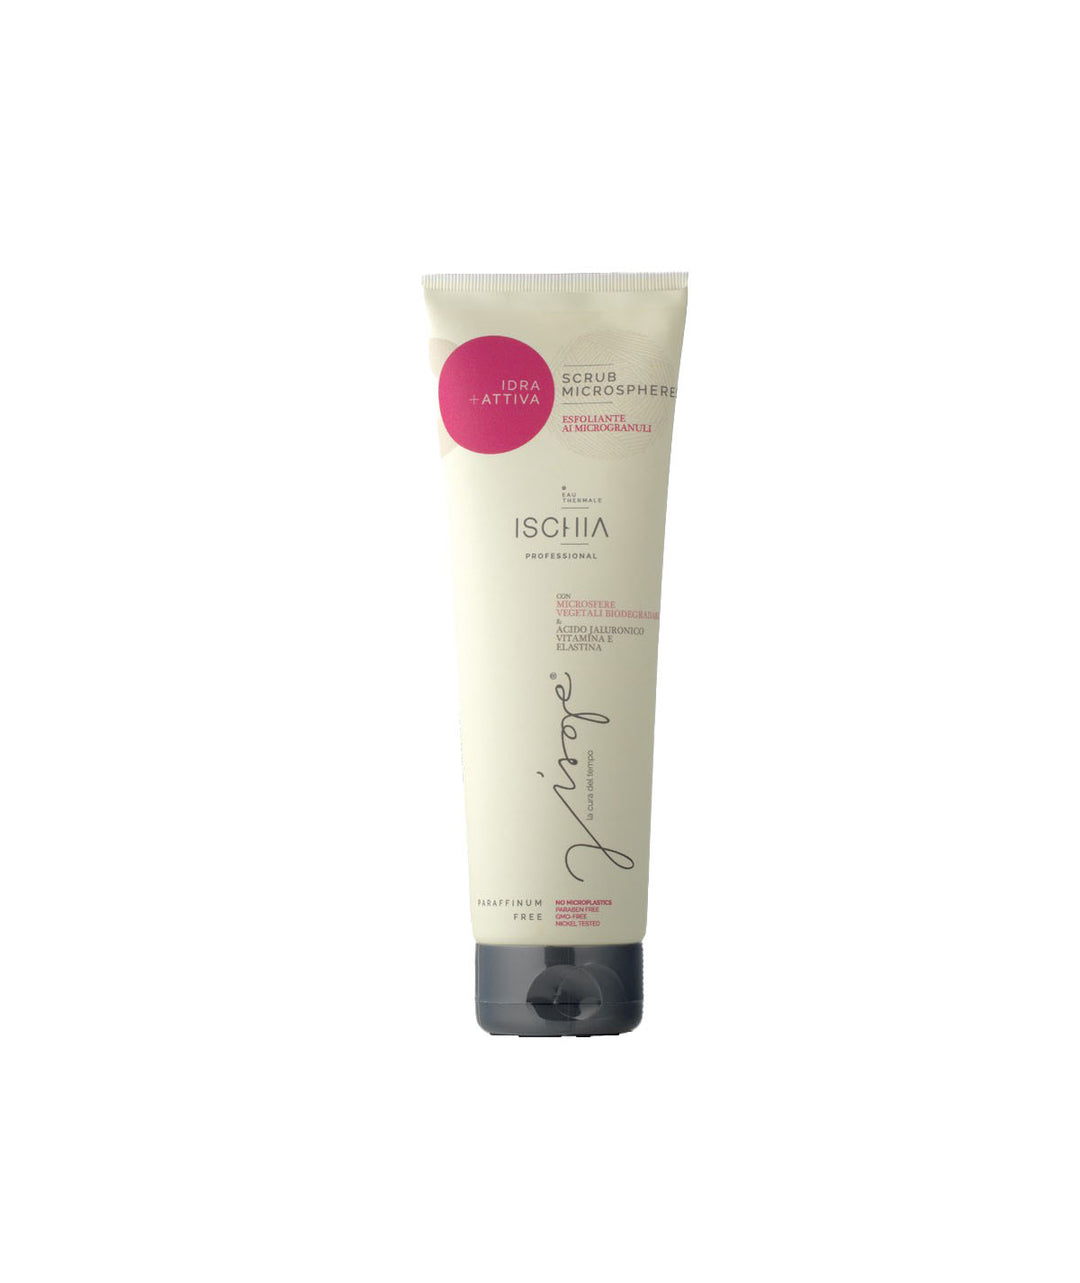 

Ischia Thermal Water Face Scrub 250 ml with Microgranules for Exfoliation.